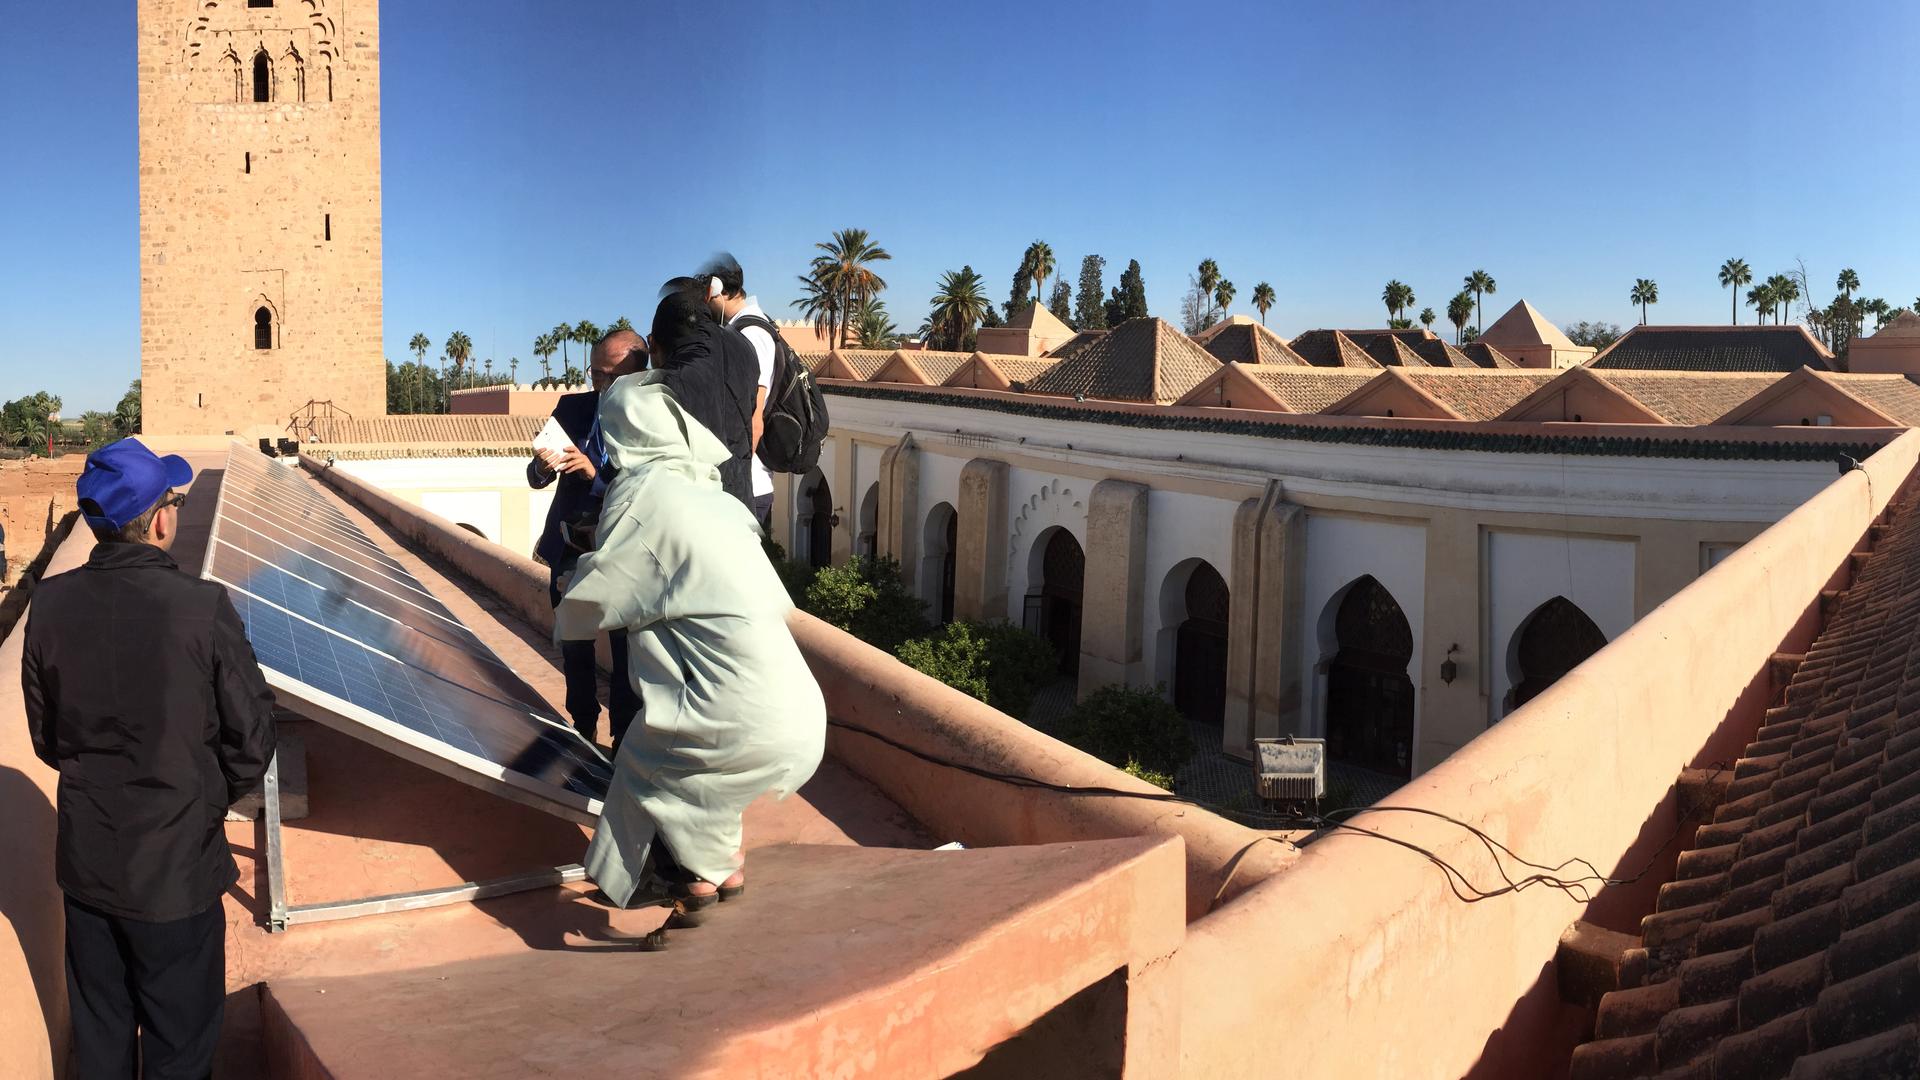 Marrakech’s Koutoubia mosque has soaked up the Moroccan sun for nearly 900 years. Now it also puts those rays to work generating clean electricity with newly installed solar panels.